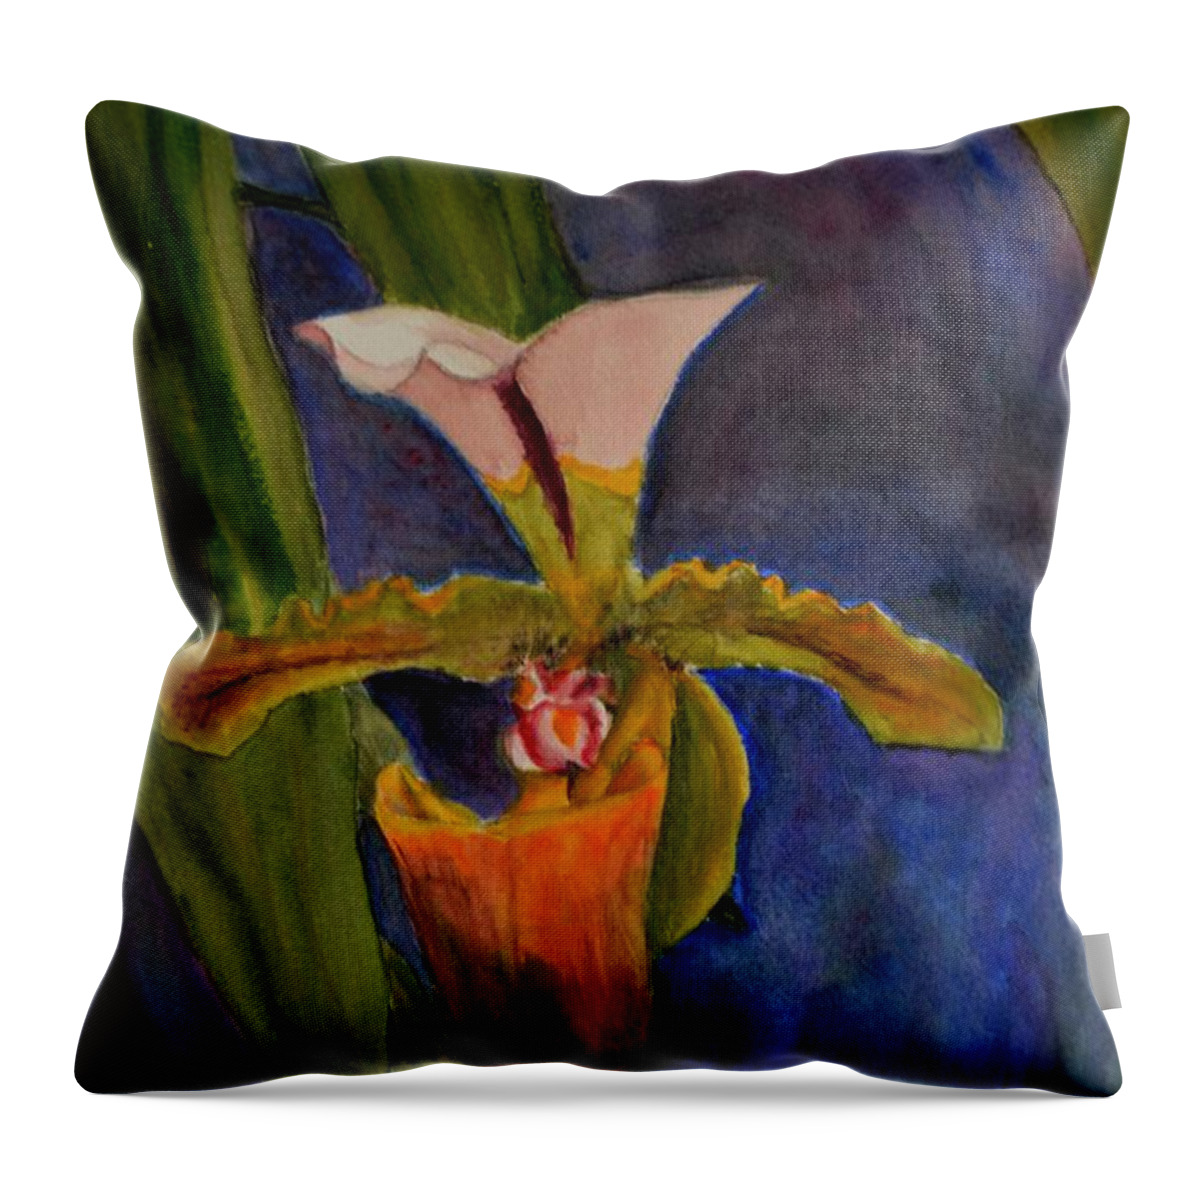 Flower Throw Pillow featuring the painting Orchid by Peggy King